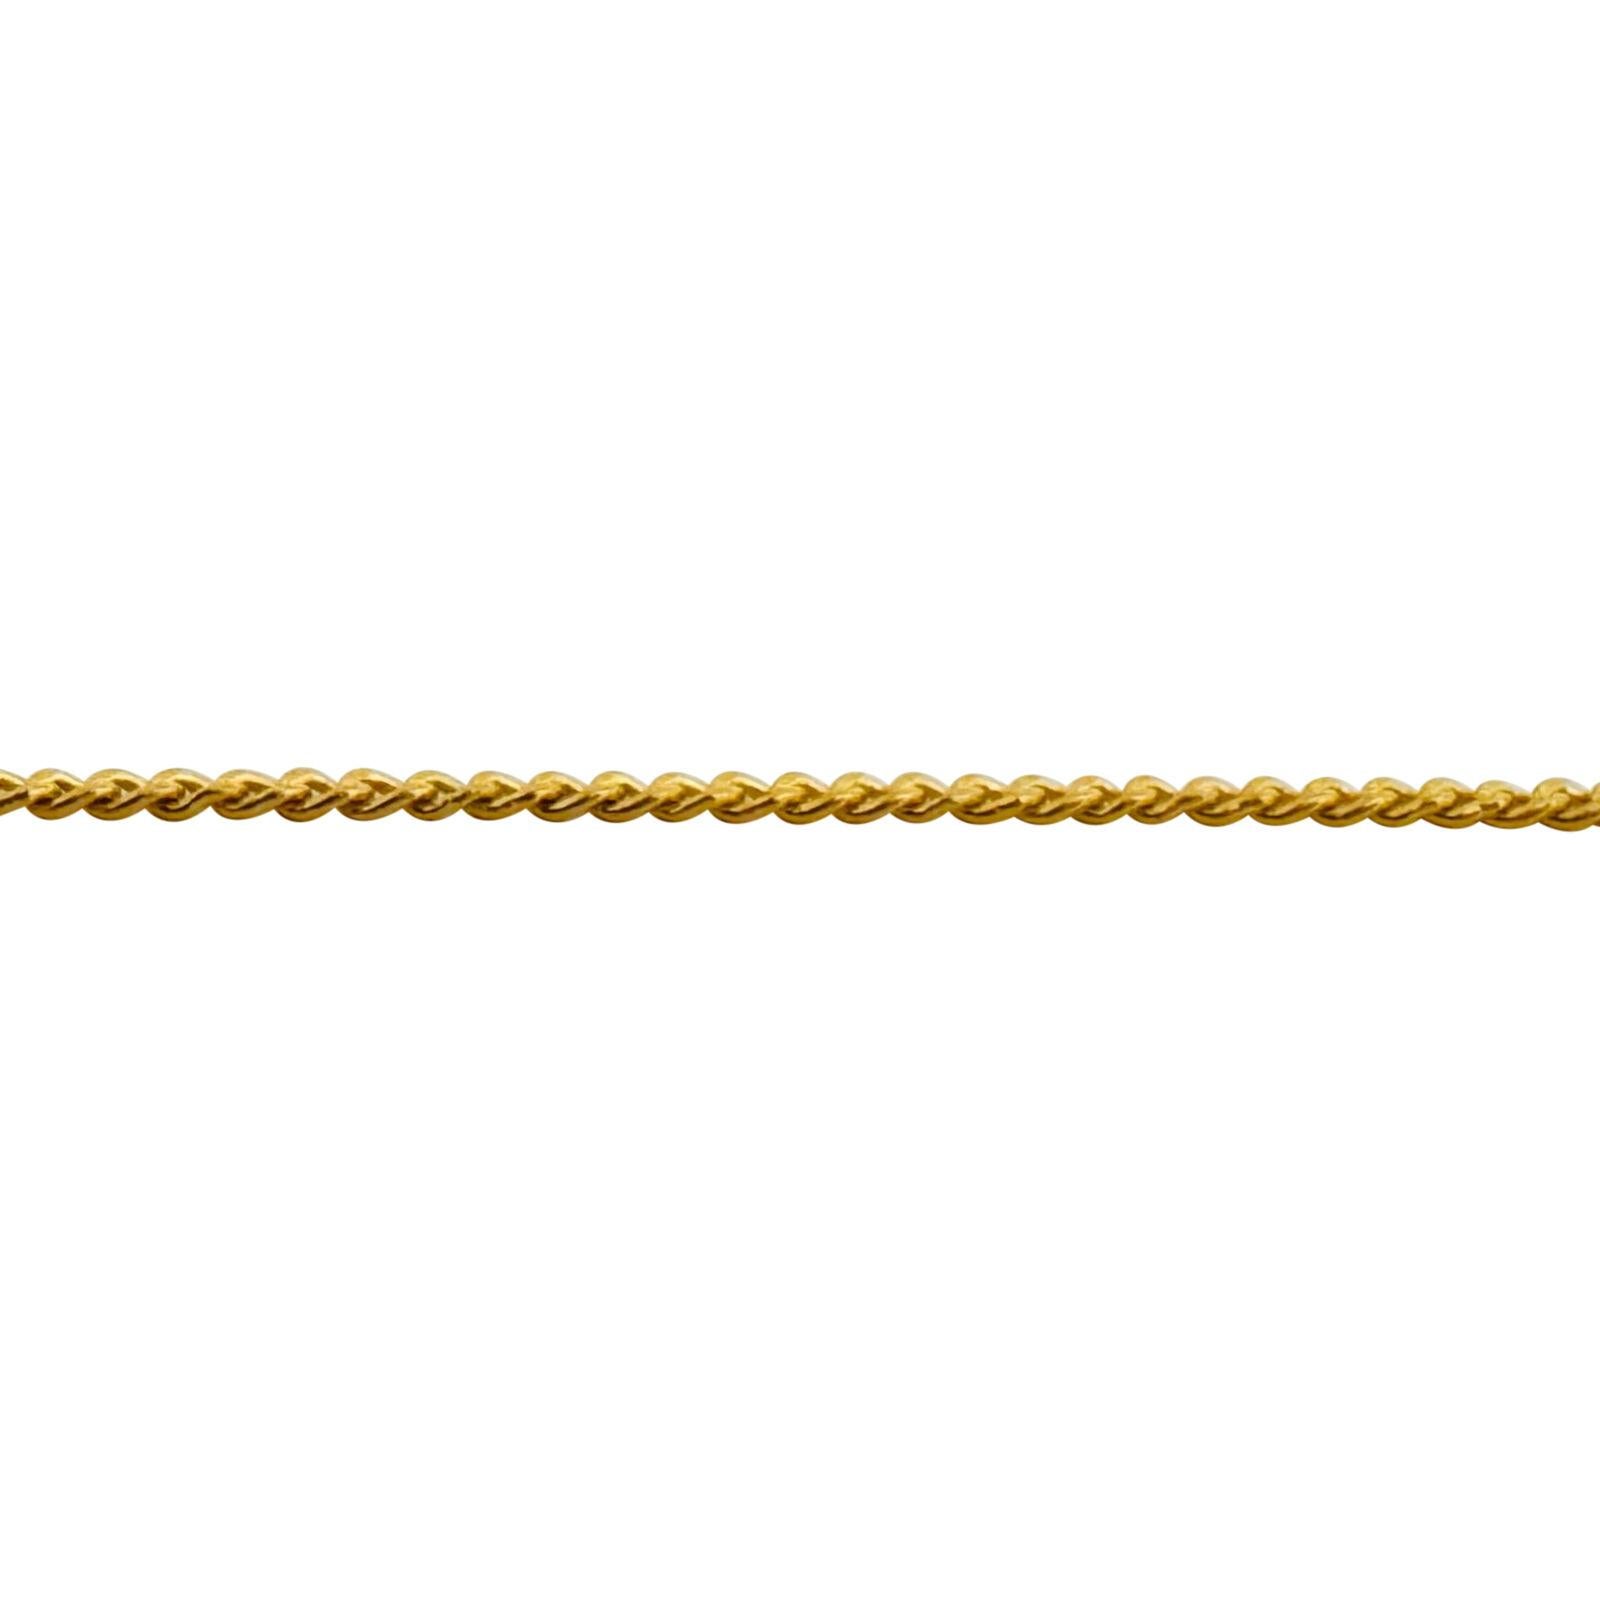 Women's or Men's 24 Karat Pure Yellow Gold Solid Thin Curb Link Chain Necklace 